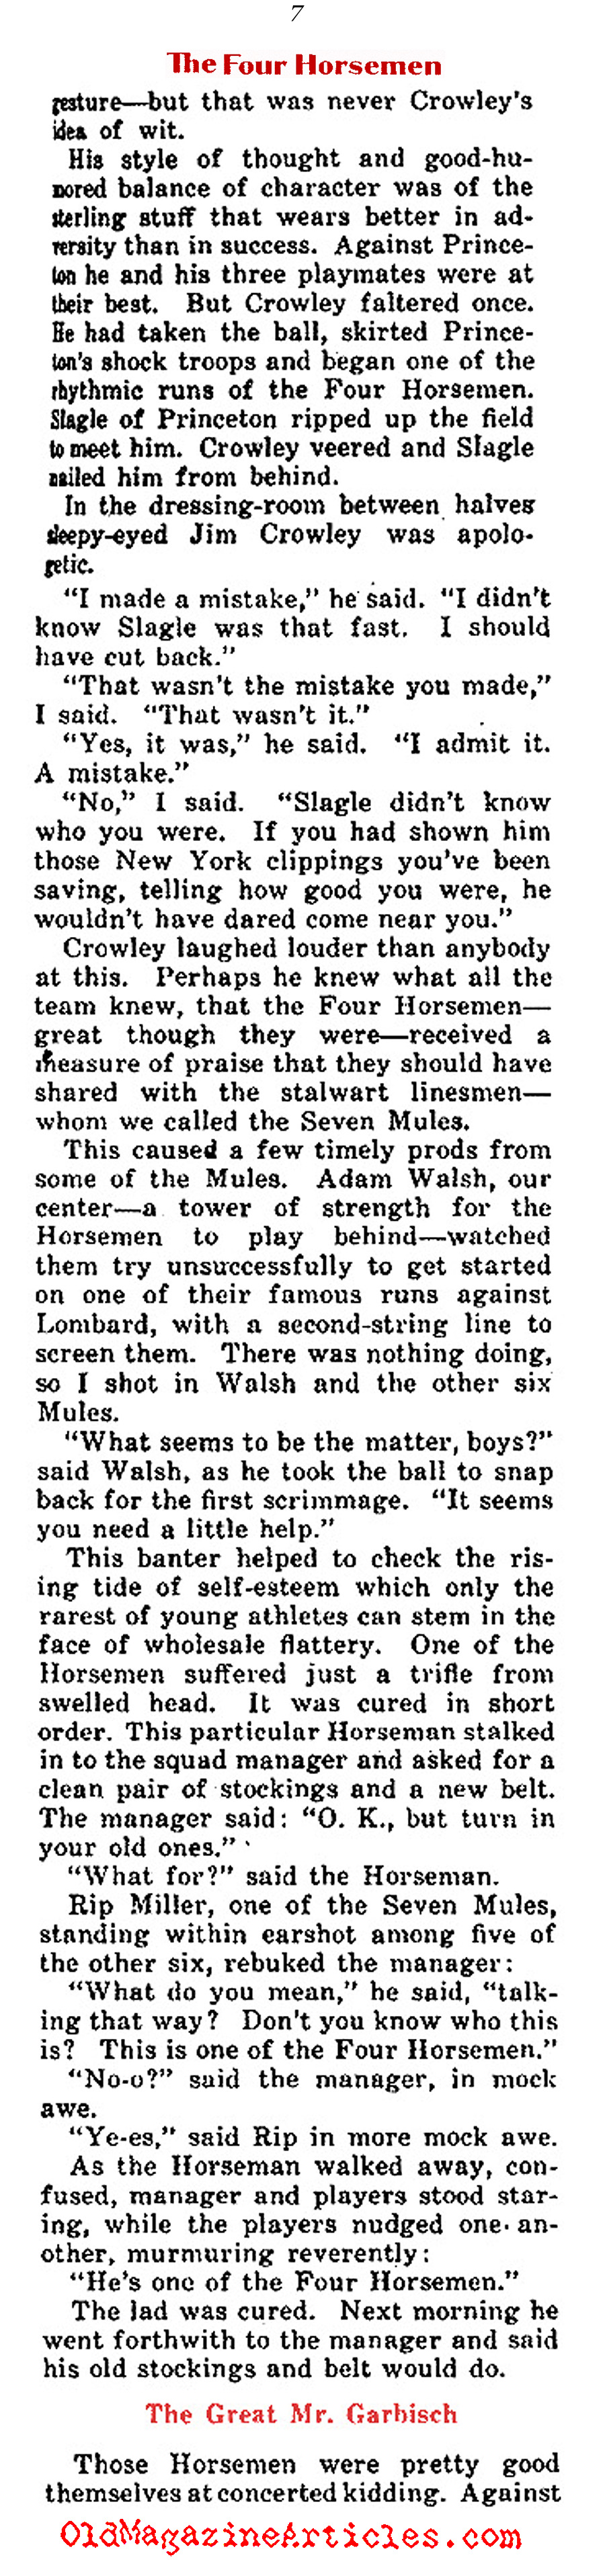 The Four Horsemen and Knute Rockne in His Own Words (Collier's Magazine, 1930)